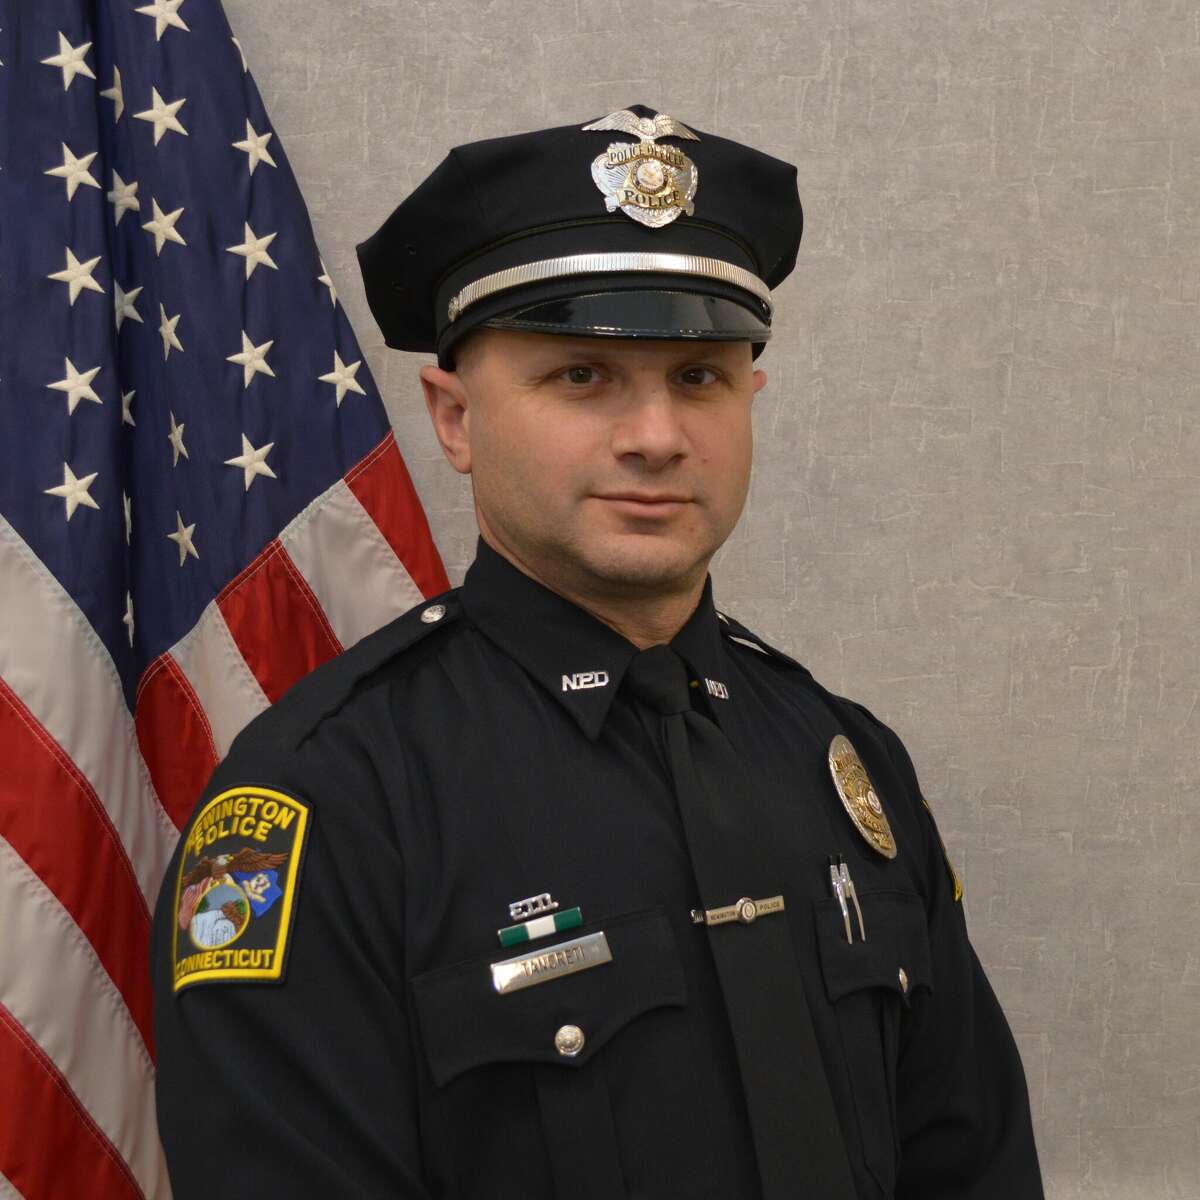 Newington Police Officer Alan Tancreti died unexpectedly at his North Haven home Saturday. He is remembered by Newington Police Department and North Haven Public Schools colleagues as a loving father and dedicated cop.